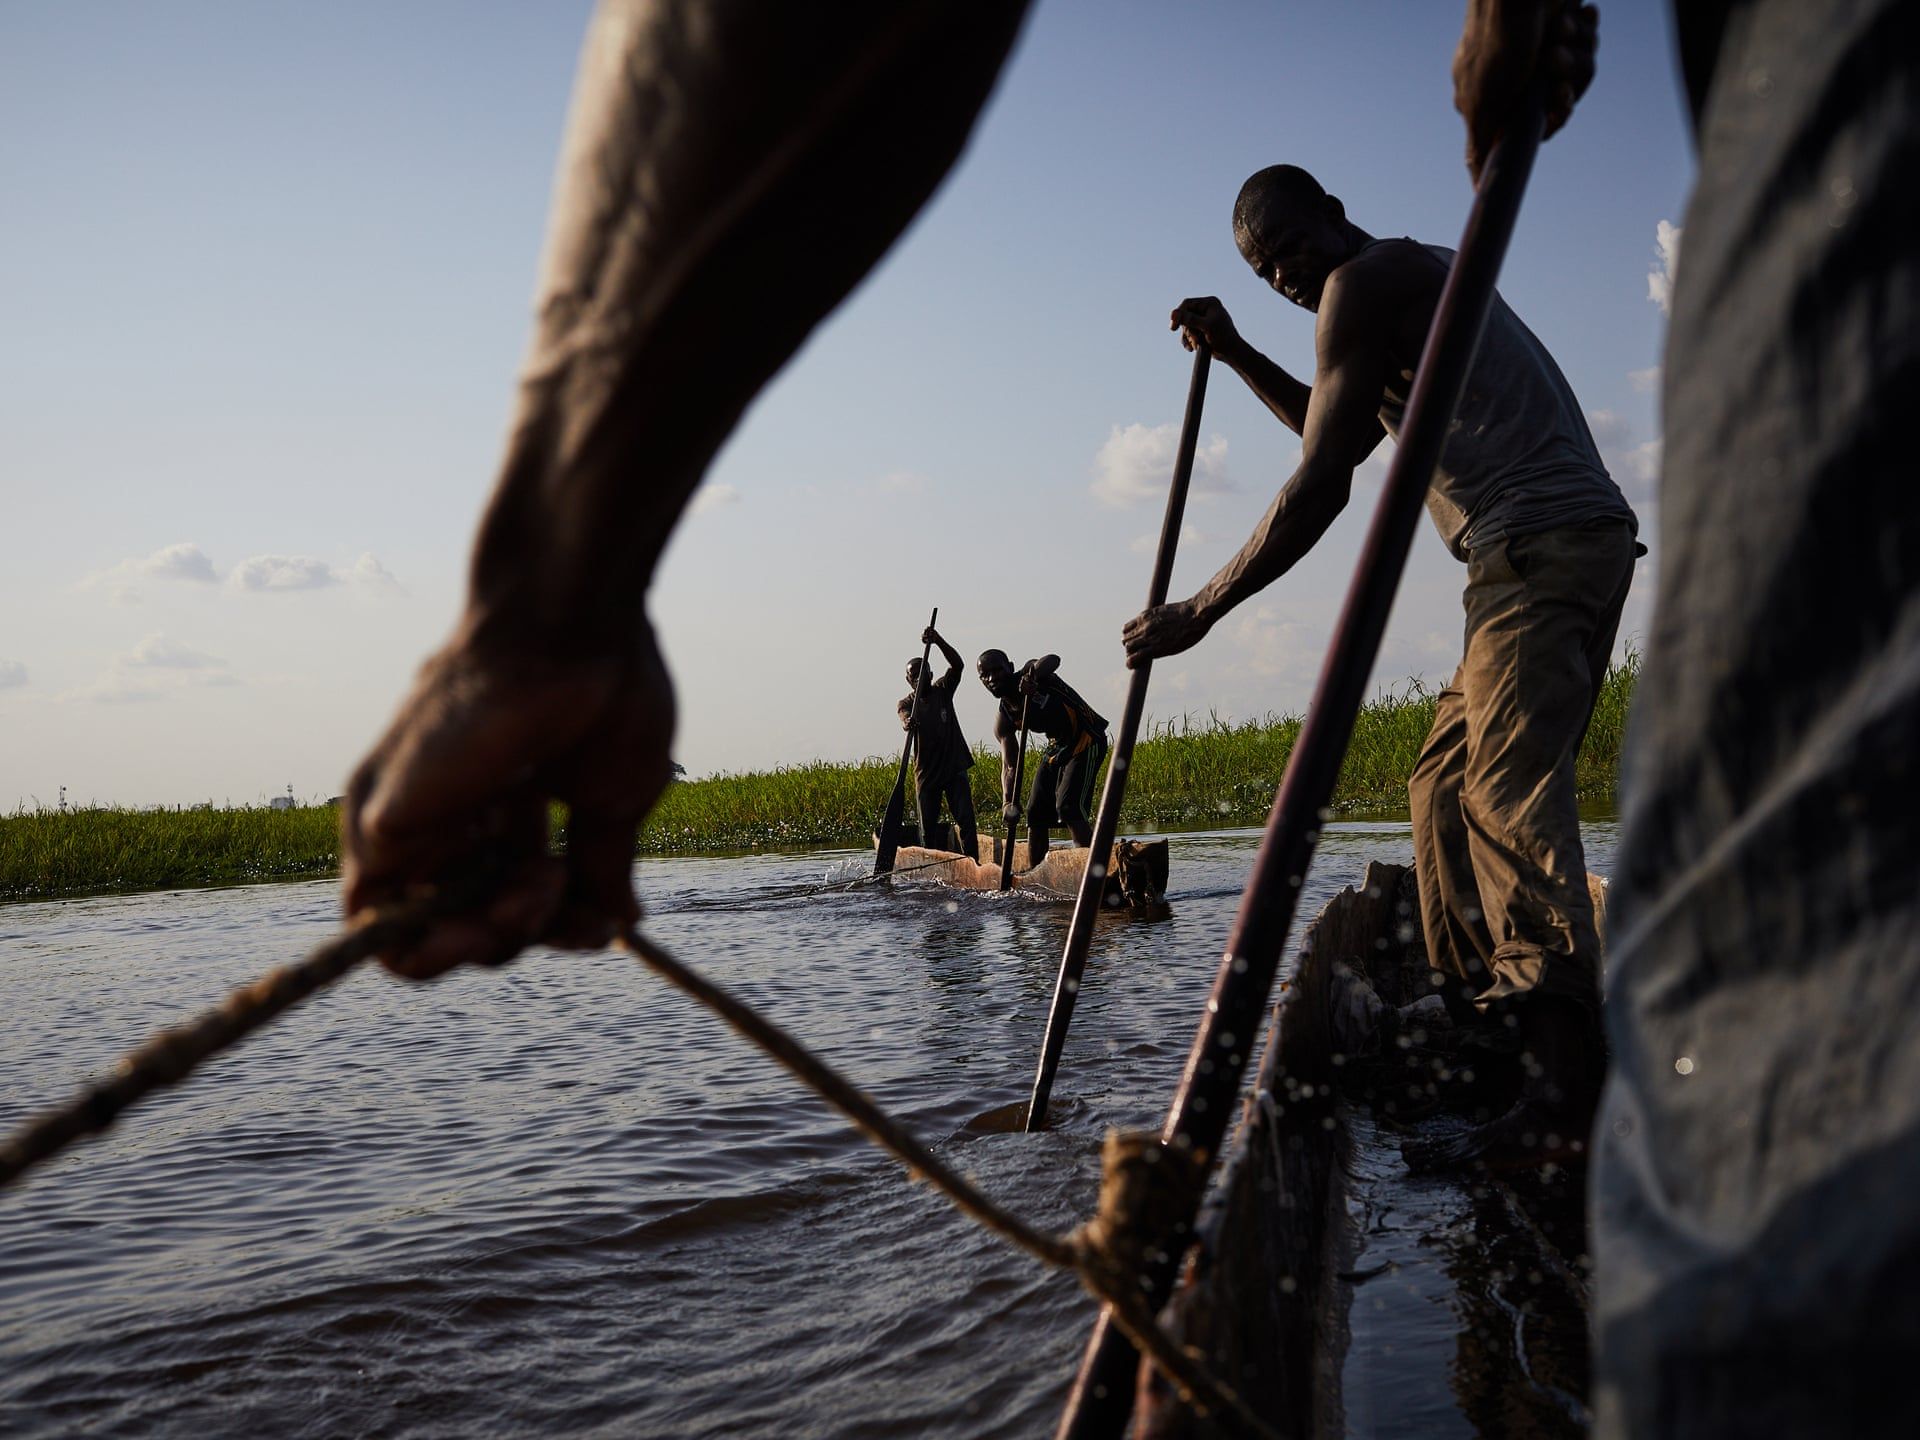 Fisherman on the Congo river, Kinshasa. Fishing is the principal activity that brings humans into contact with snakes in DRC. Snakes often are often caught in nets, or hunt for fish themselves in the water and on the shores. Image by Hugh Kinsella Cunningham. Congo, 2019.